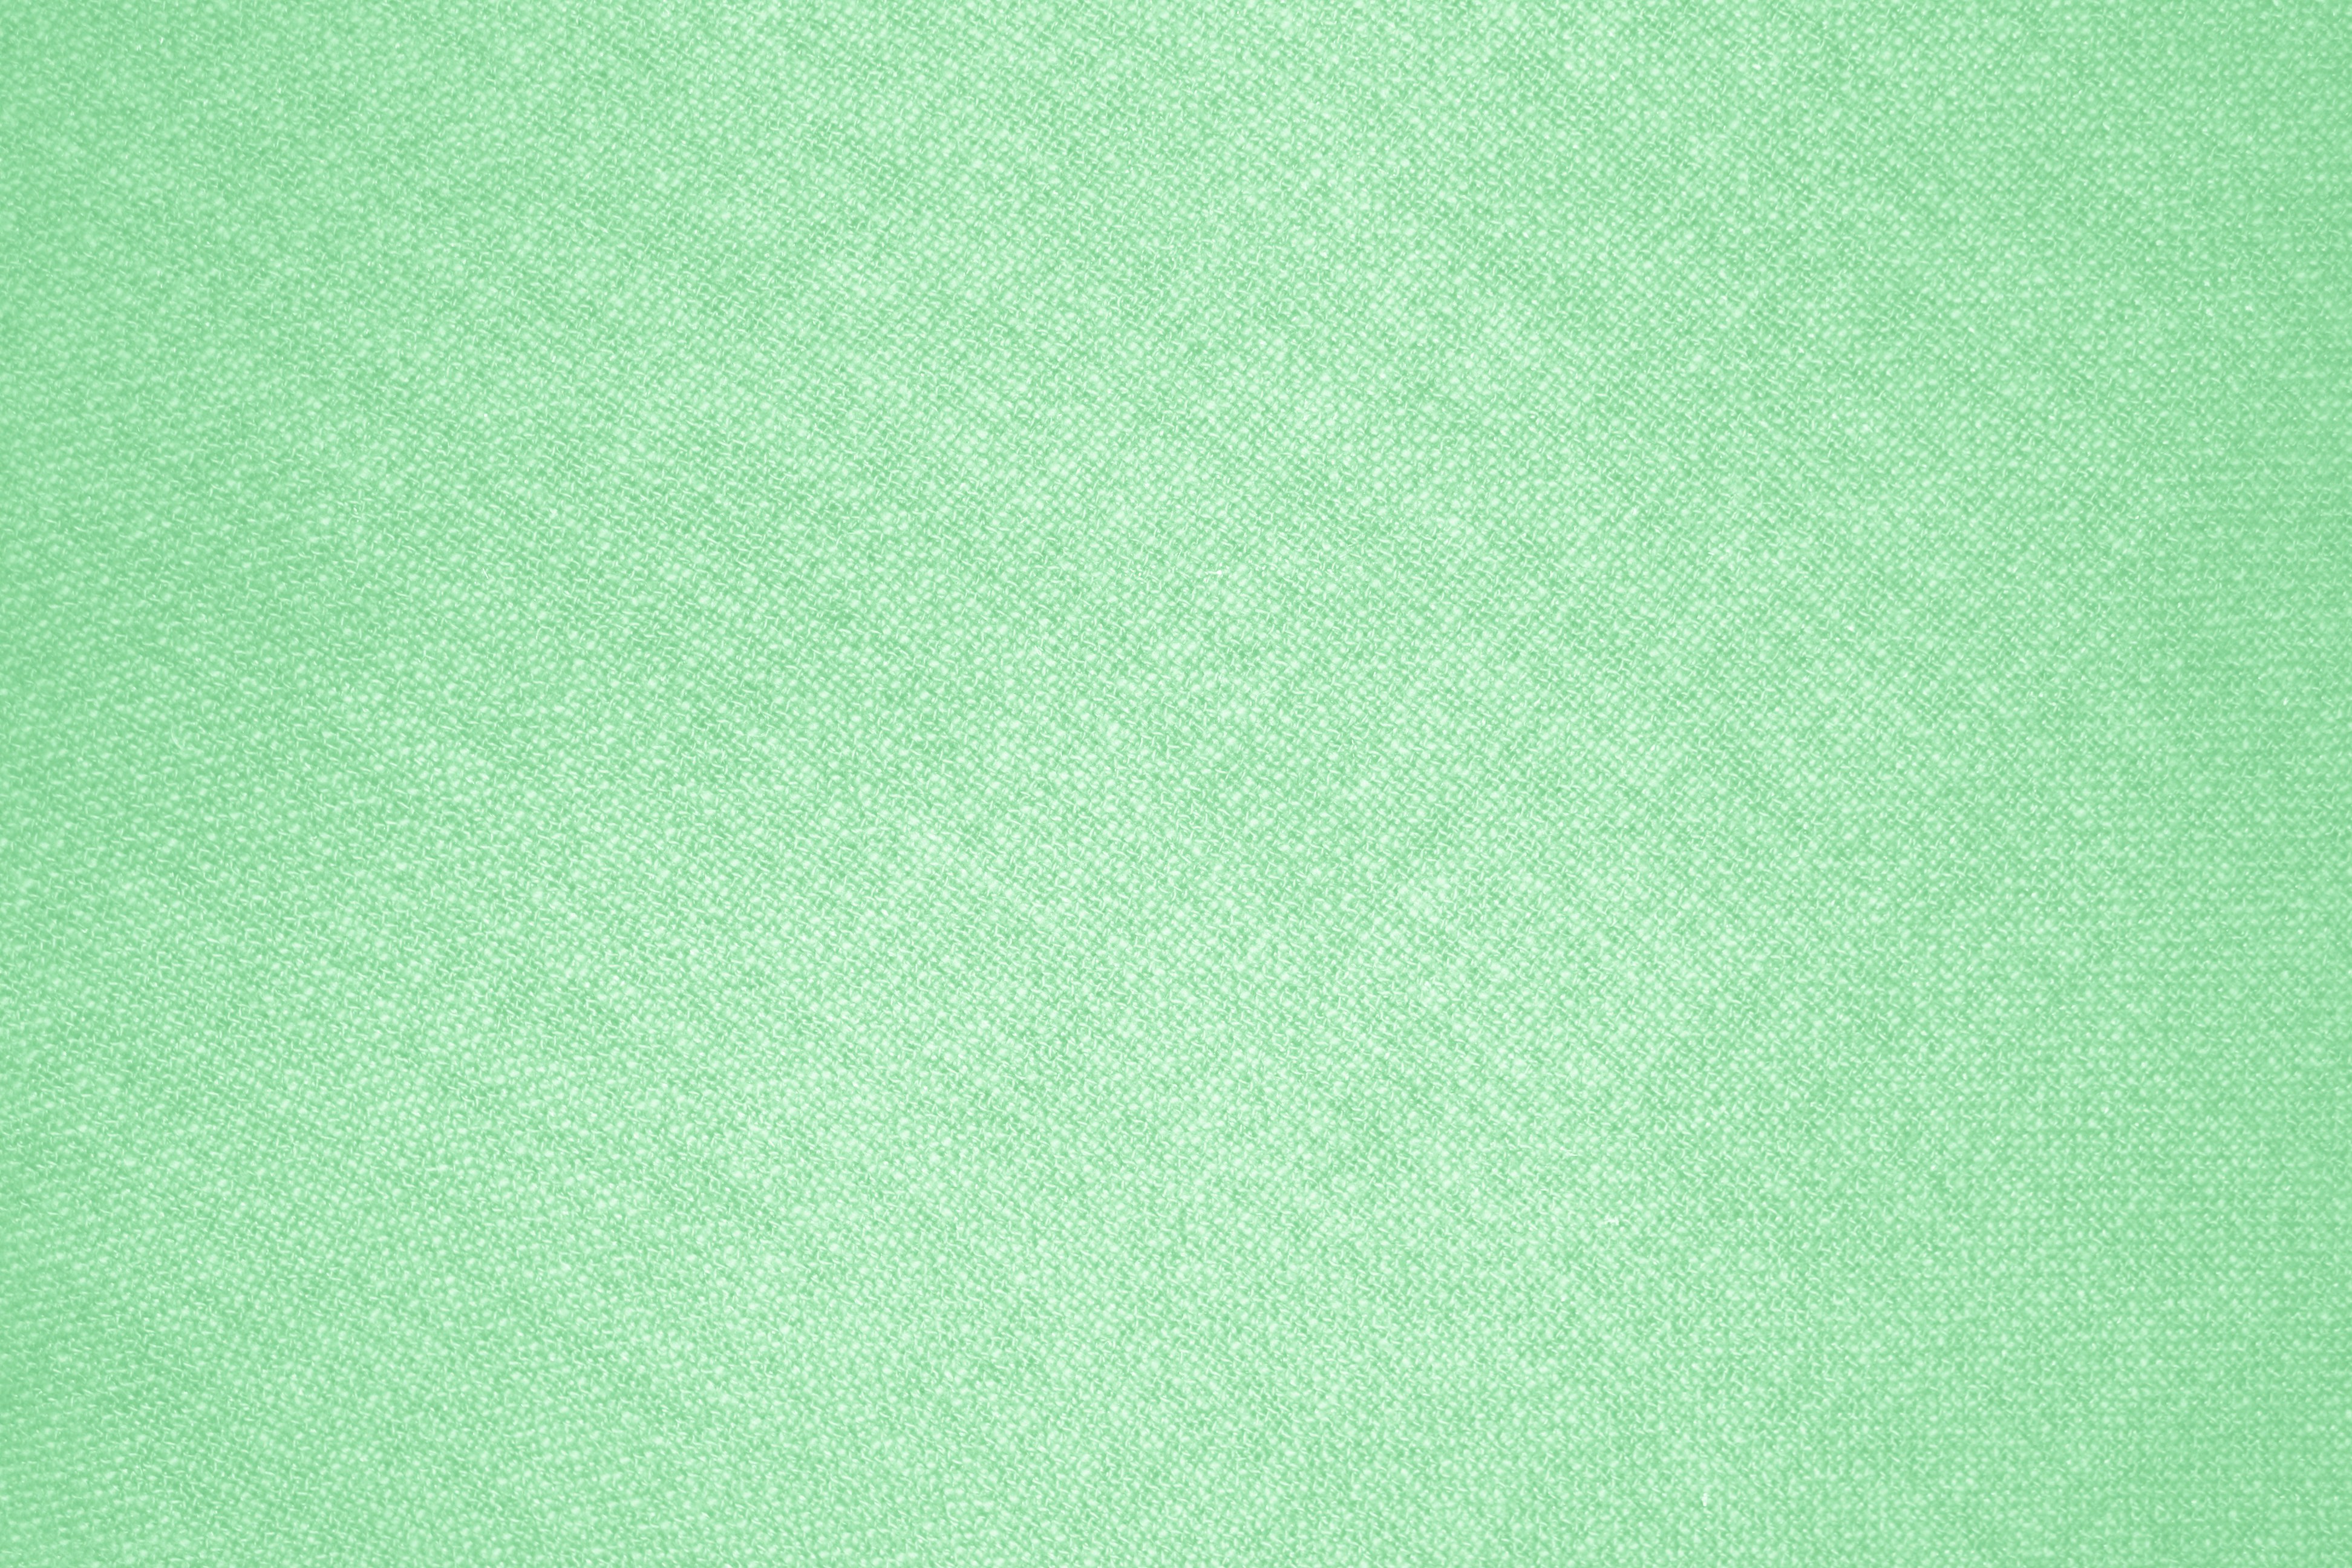 380 Green HD Wallpapers and Backgrounds